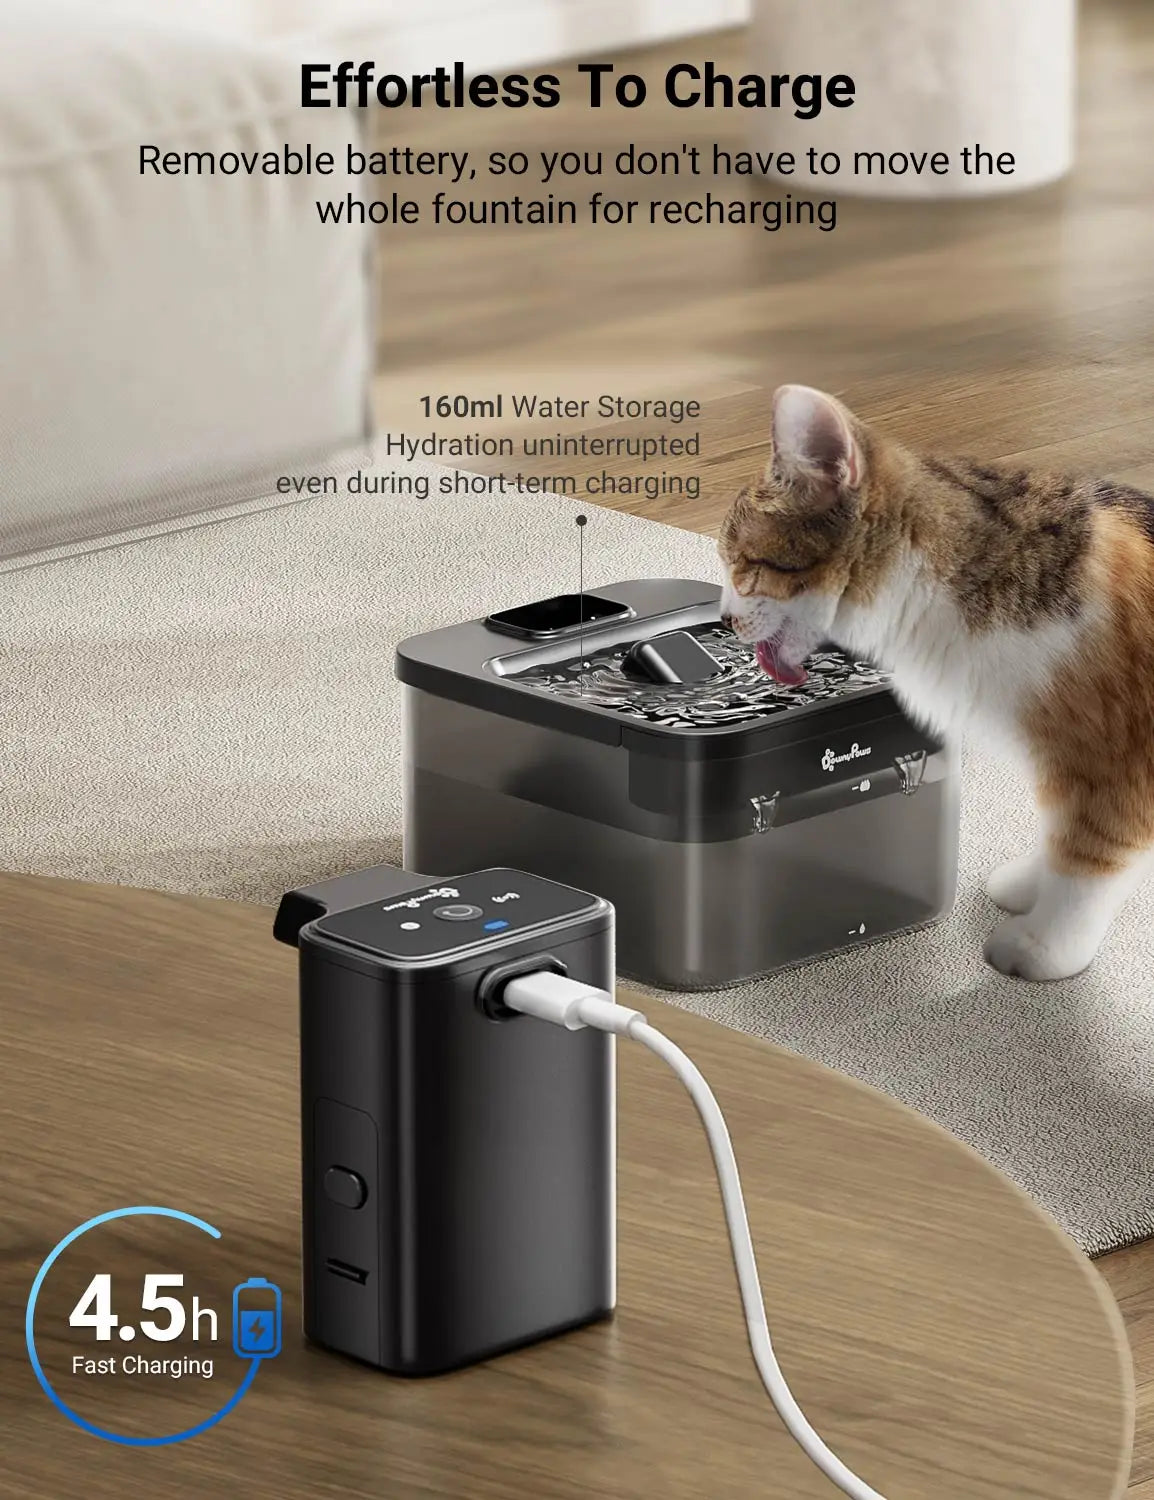 Battery-Operated Automatic Pet Water Dispenser with Motion Sensor